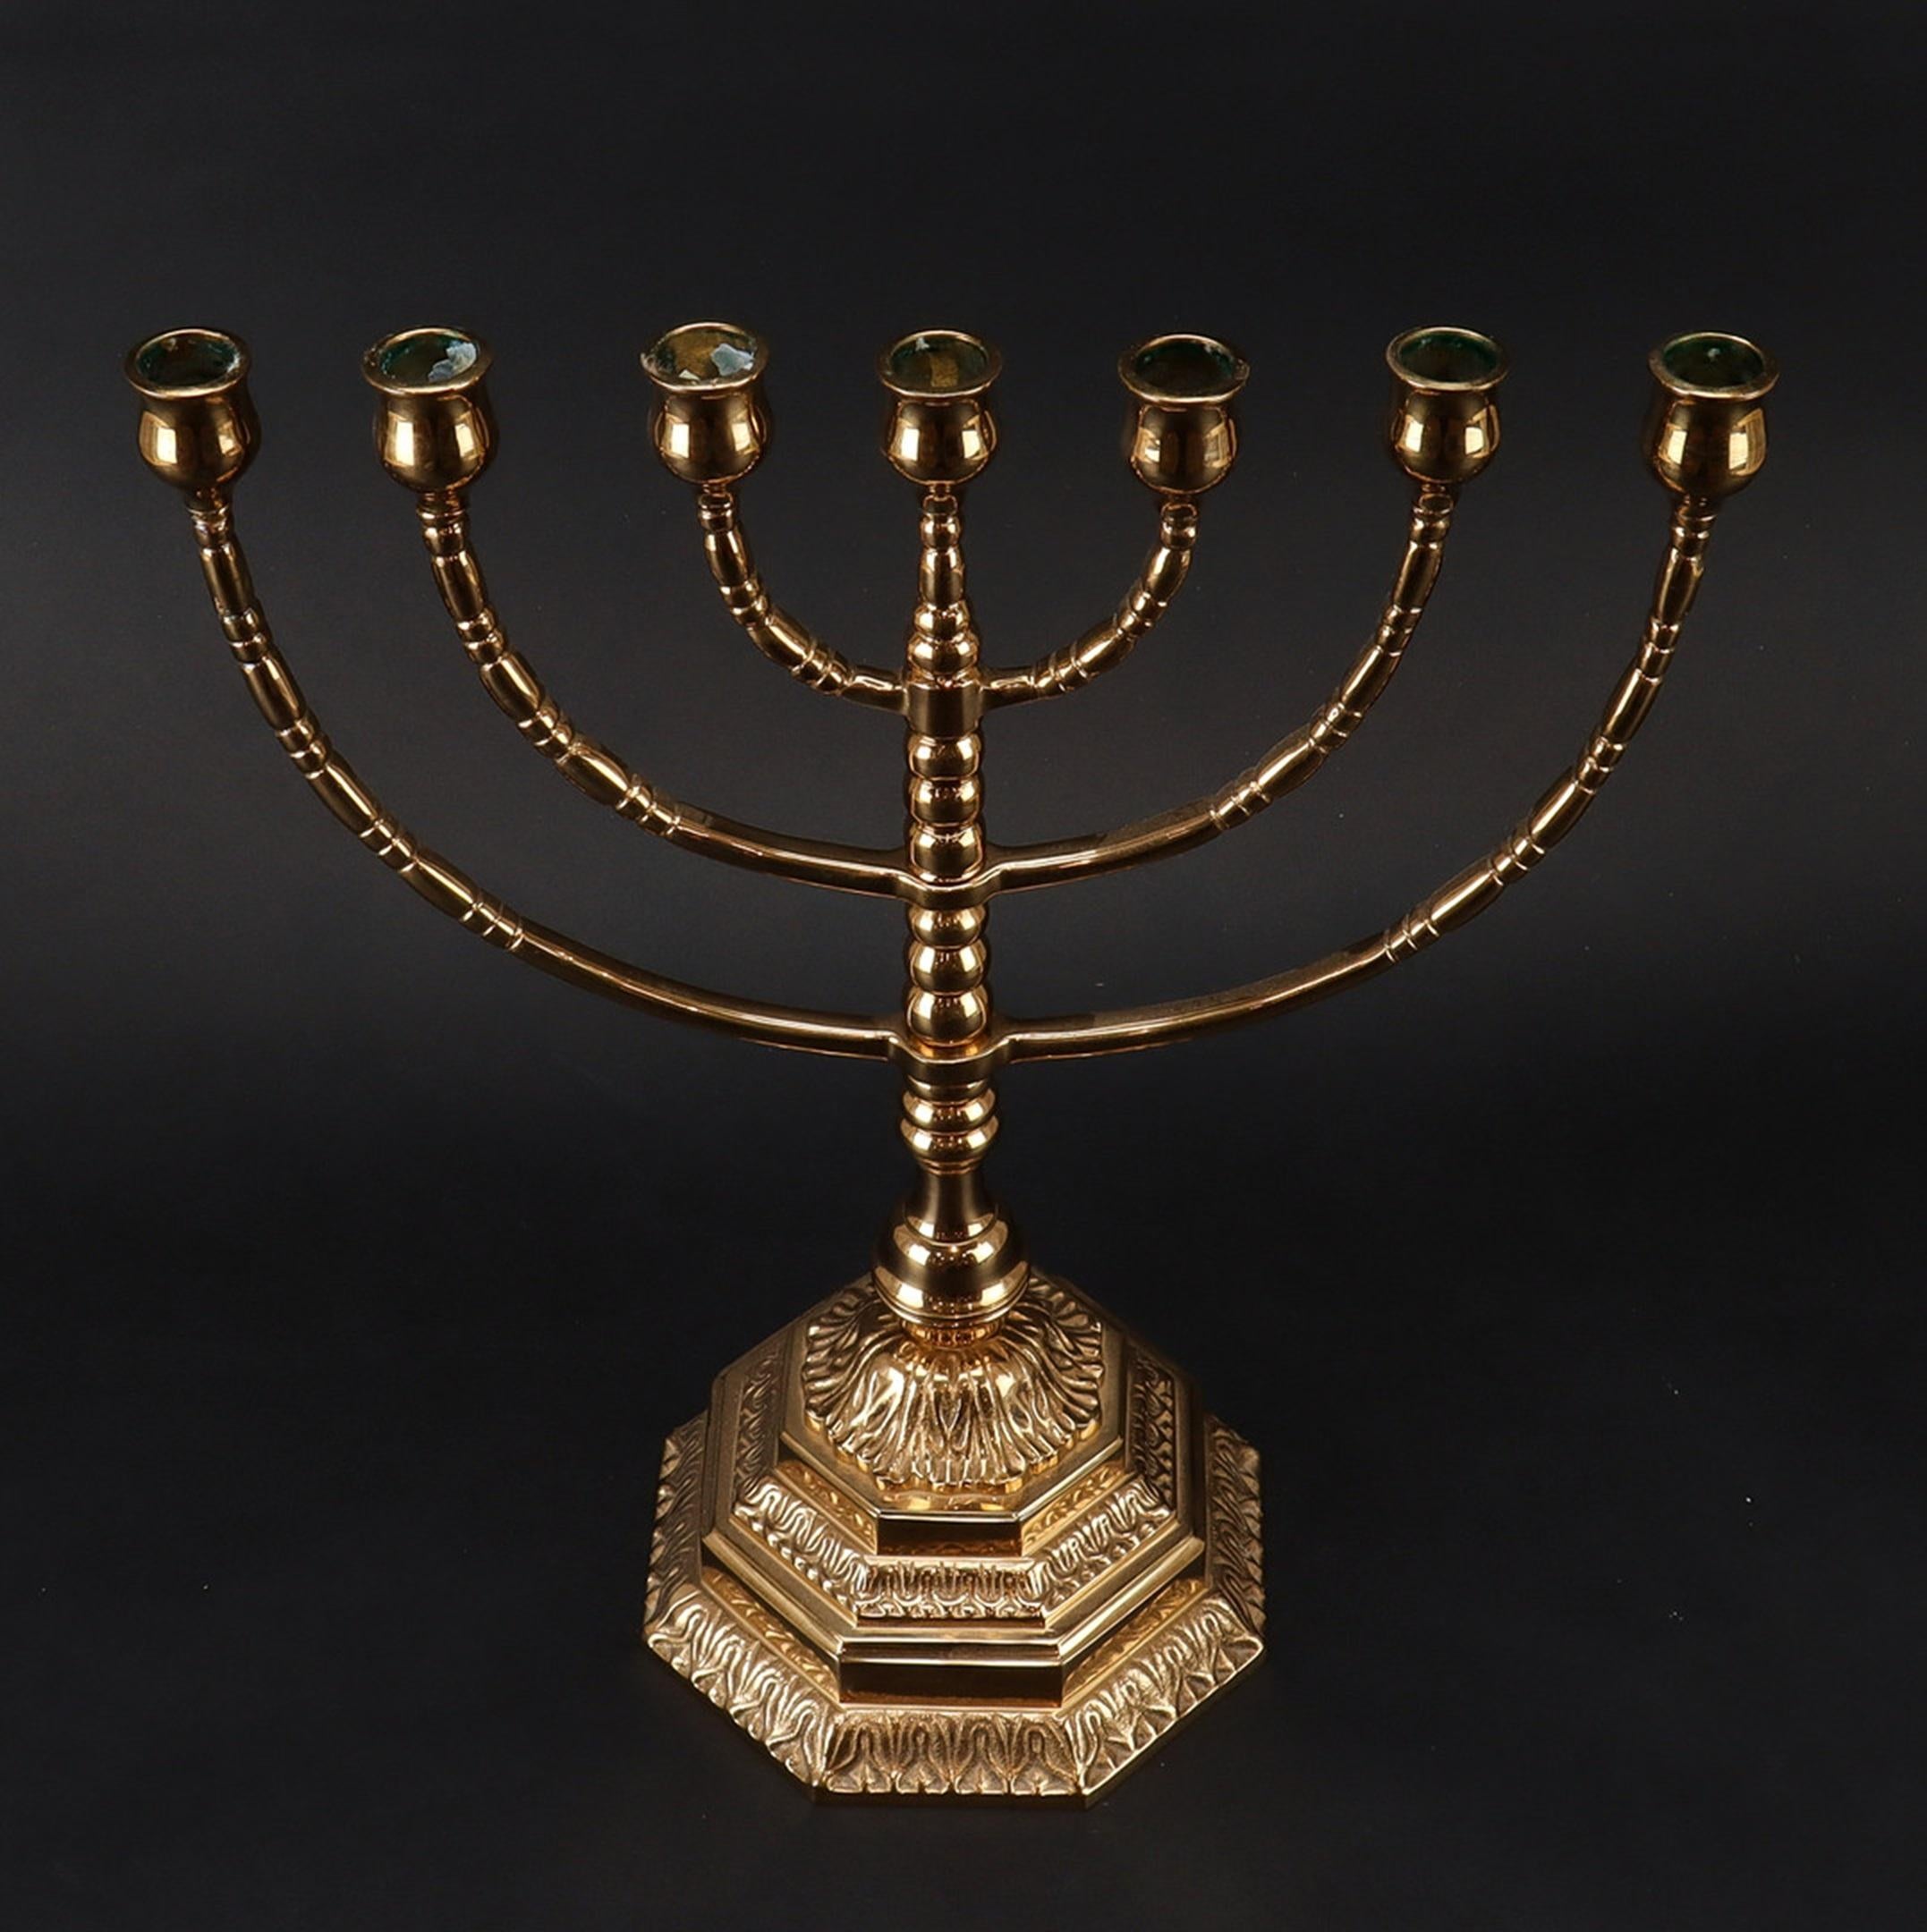 Antique Candelabras Brutalist Menorah Jewish Judaica Golden Candle Holders Brass In Excellent Condition For Sale In Hampshire, GB